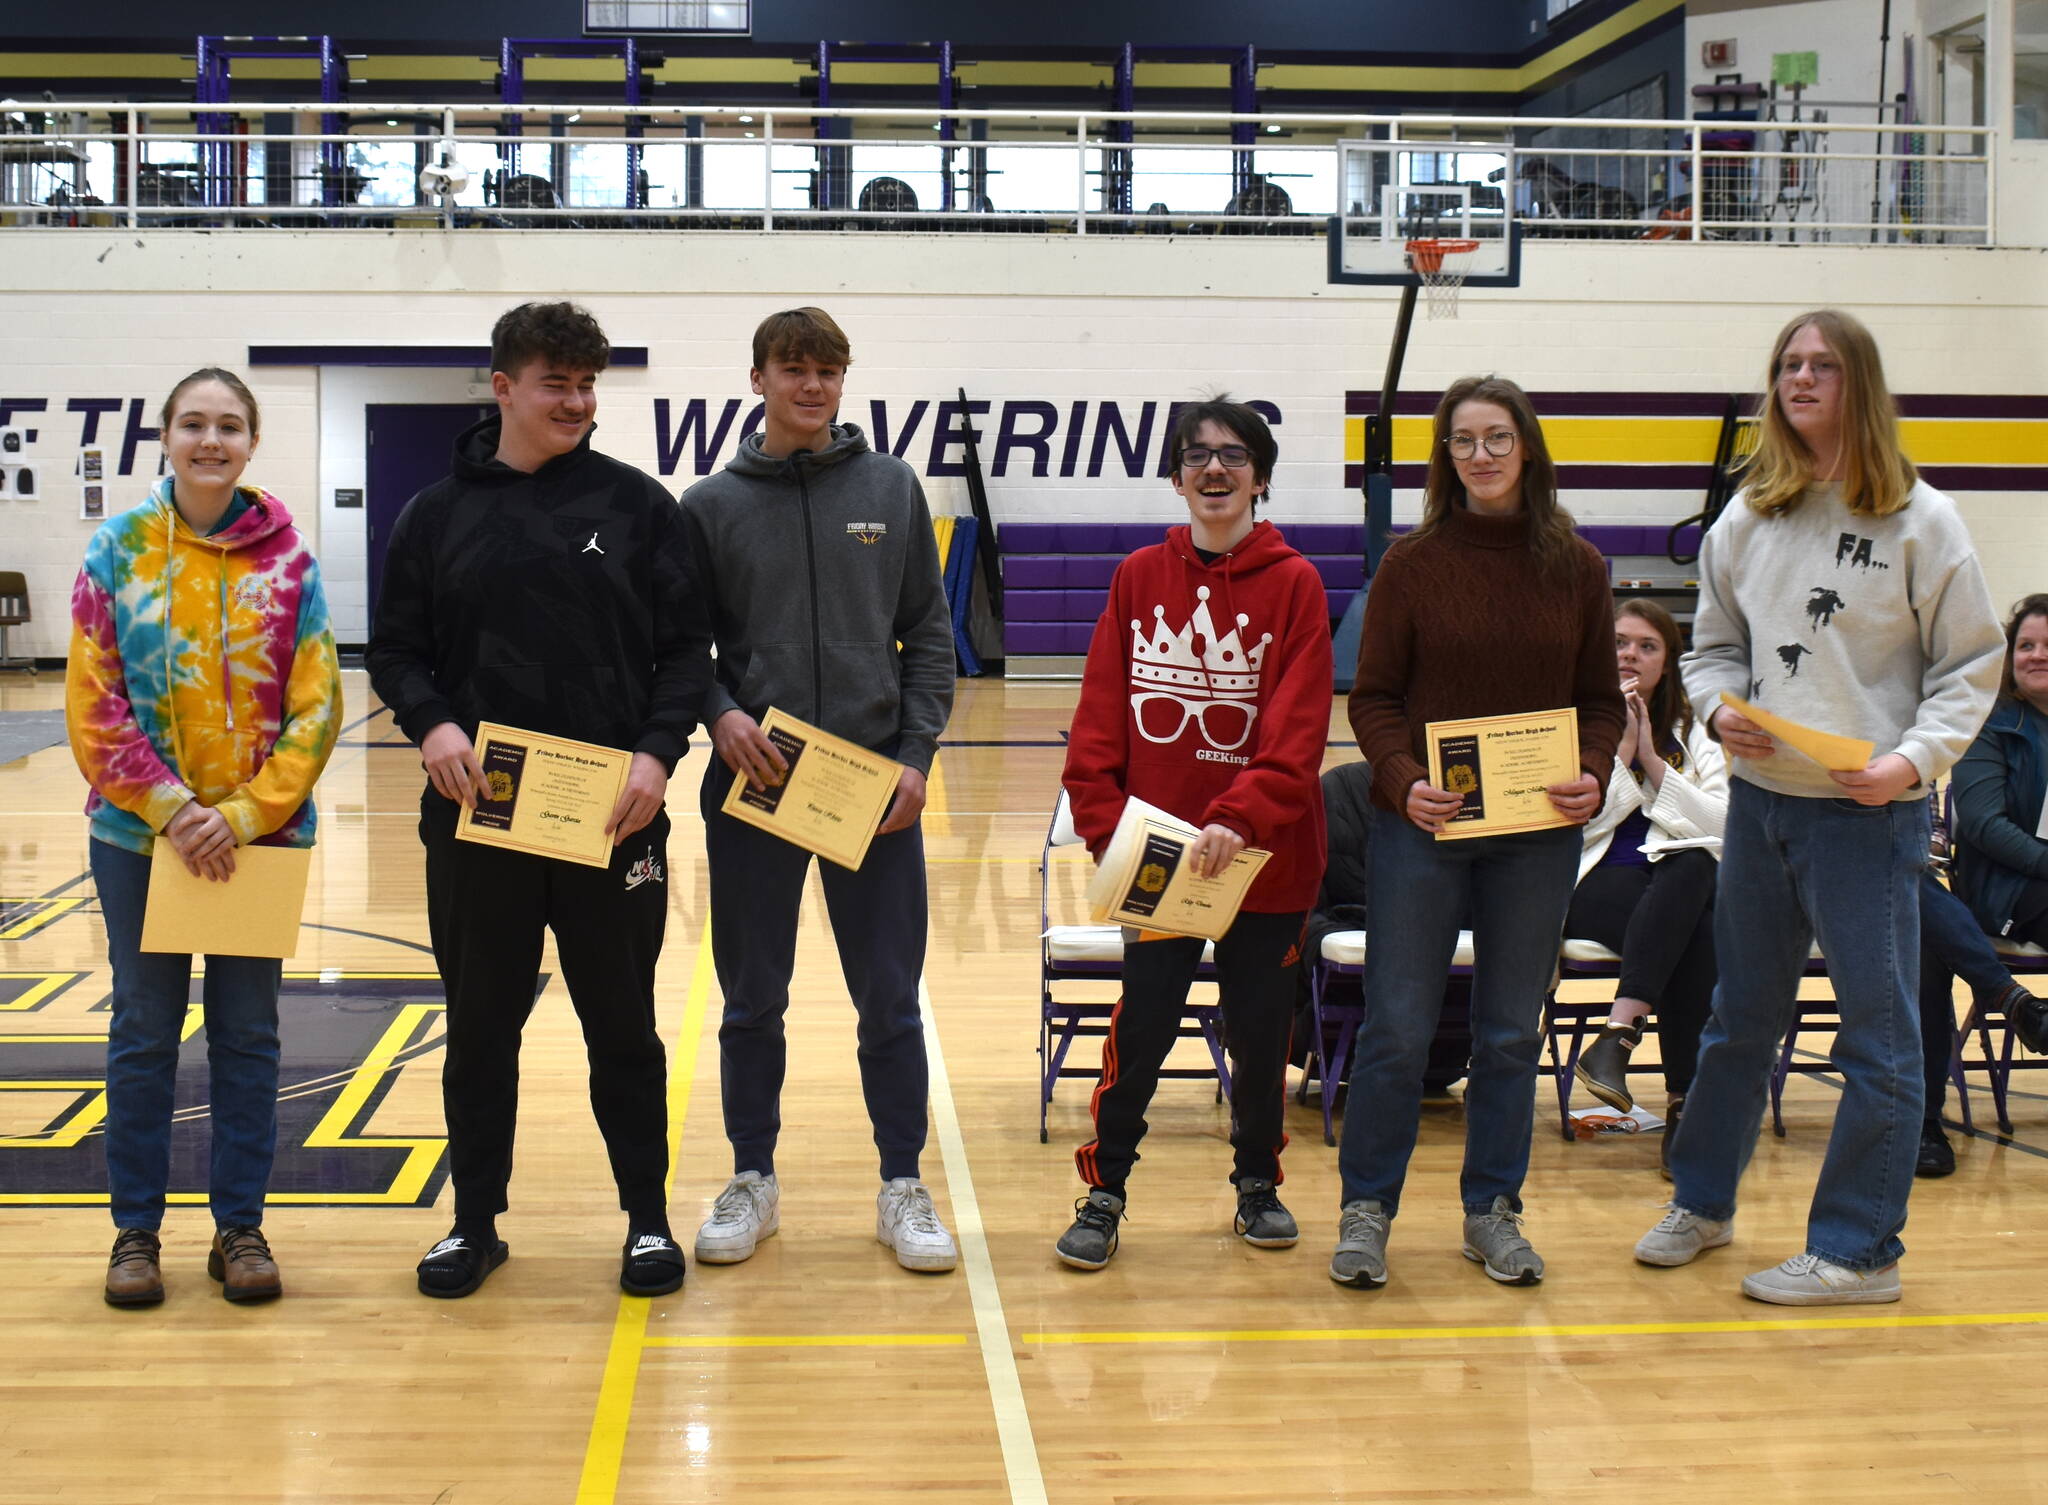 Staff photo by Kelley Balcomb-Bartok
Friday Harbor High School Principal's Honors Awards were presented to Class of 2025 students Kira Clark, Malachi Cullen, Riley Donoho, Gavin Garcia, Pierce Kleine, Jesus Melendez, Megan Mellinger, and Sullivan Wilkinson during the FHHS Celebration of Academics event held March 10 in the Turnball Gym. This award recognizes students who earned a 4.0 GPA during the Spring 2022 and/or Fall 2022-2023 semesters.